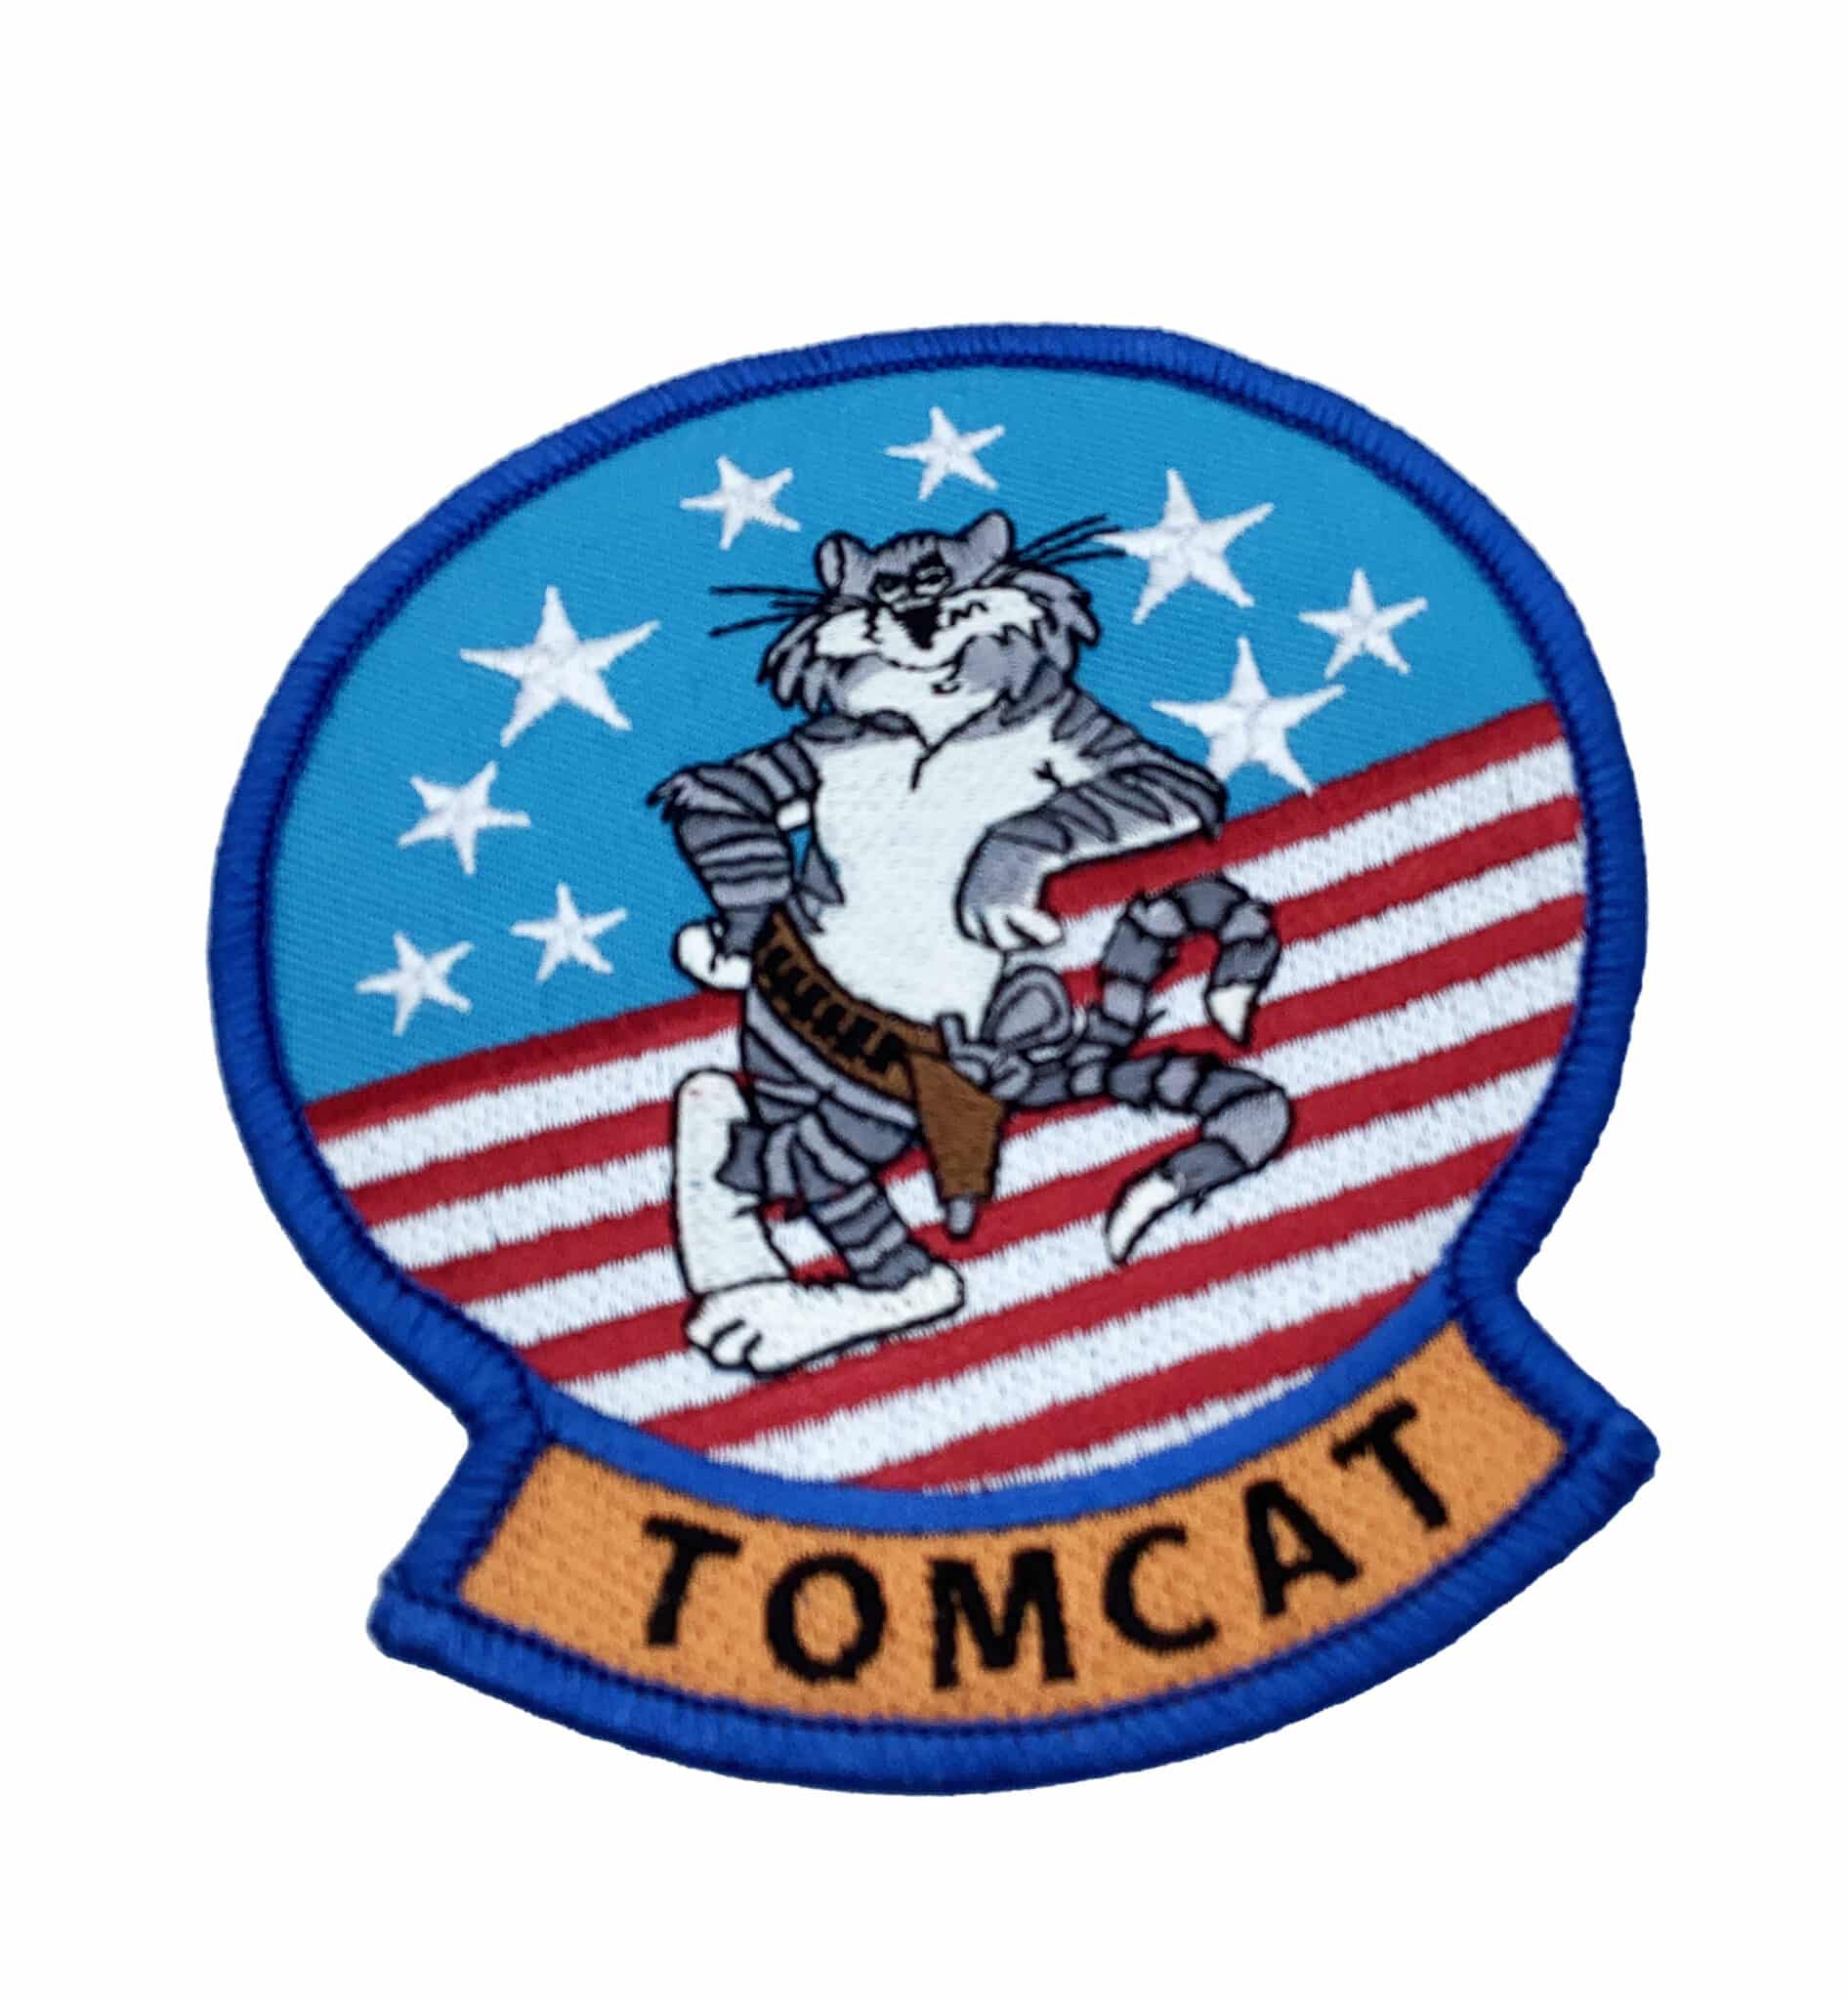 TOMCAT Patch – With Hook and Loop